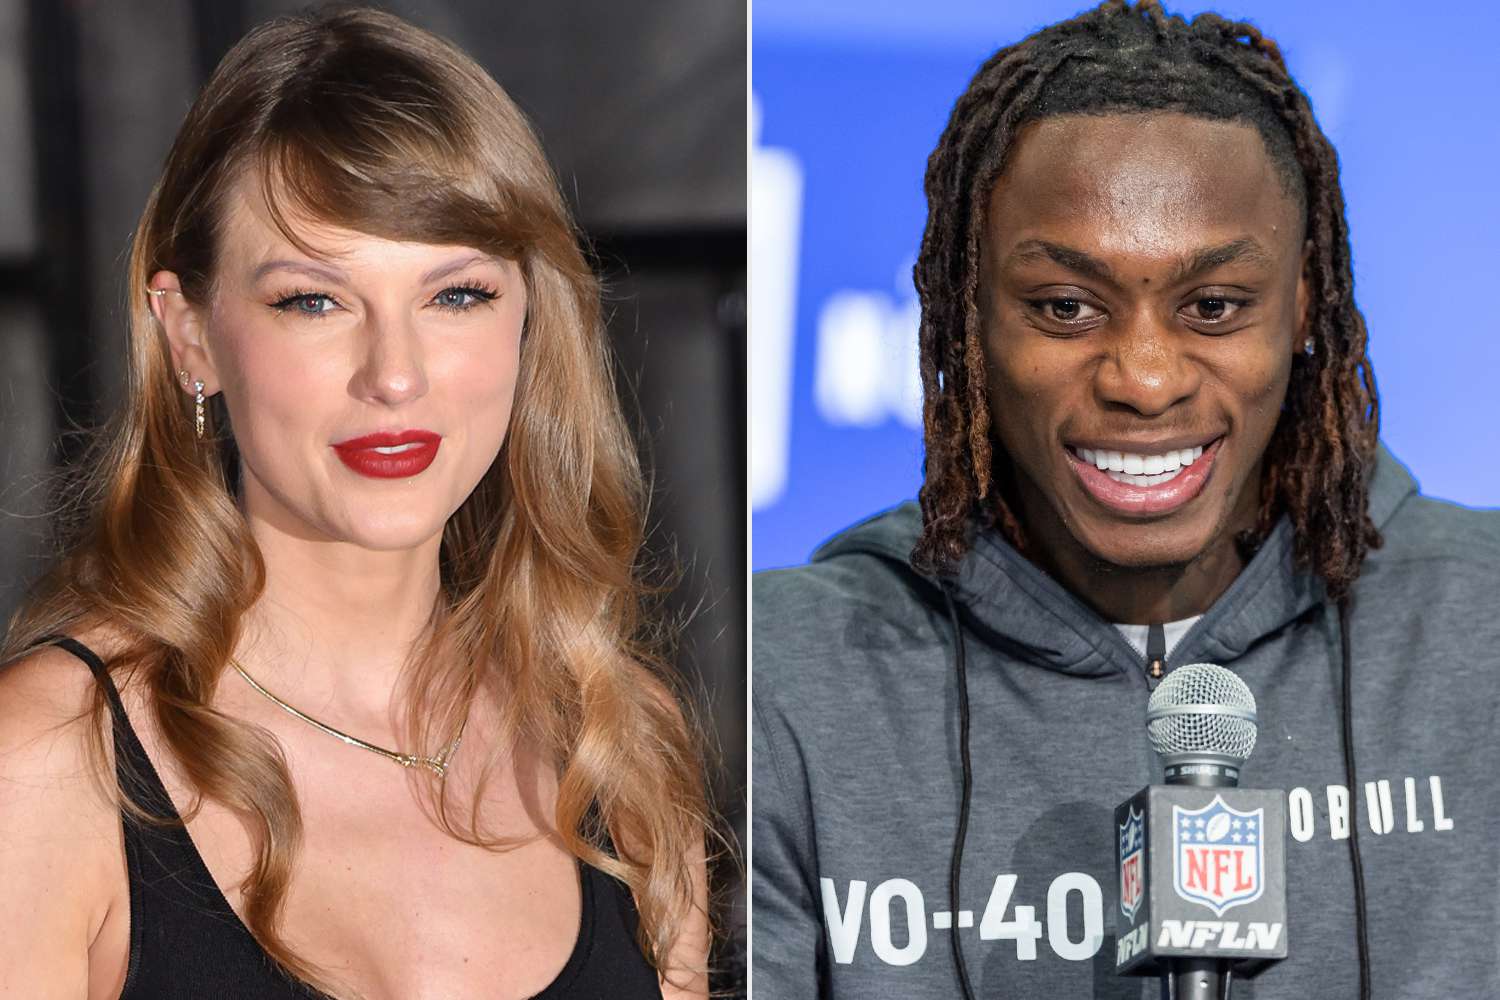 Taylor Swift Shows Love for Chiefs by Liking Post of Xavier Worthy Being Drafted by Kansas City